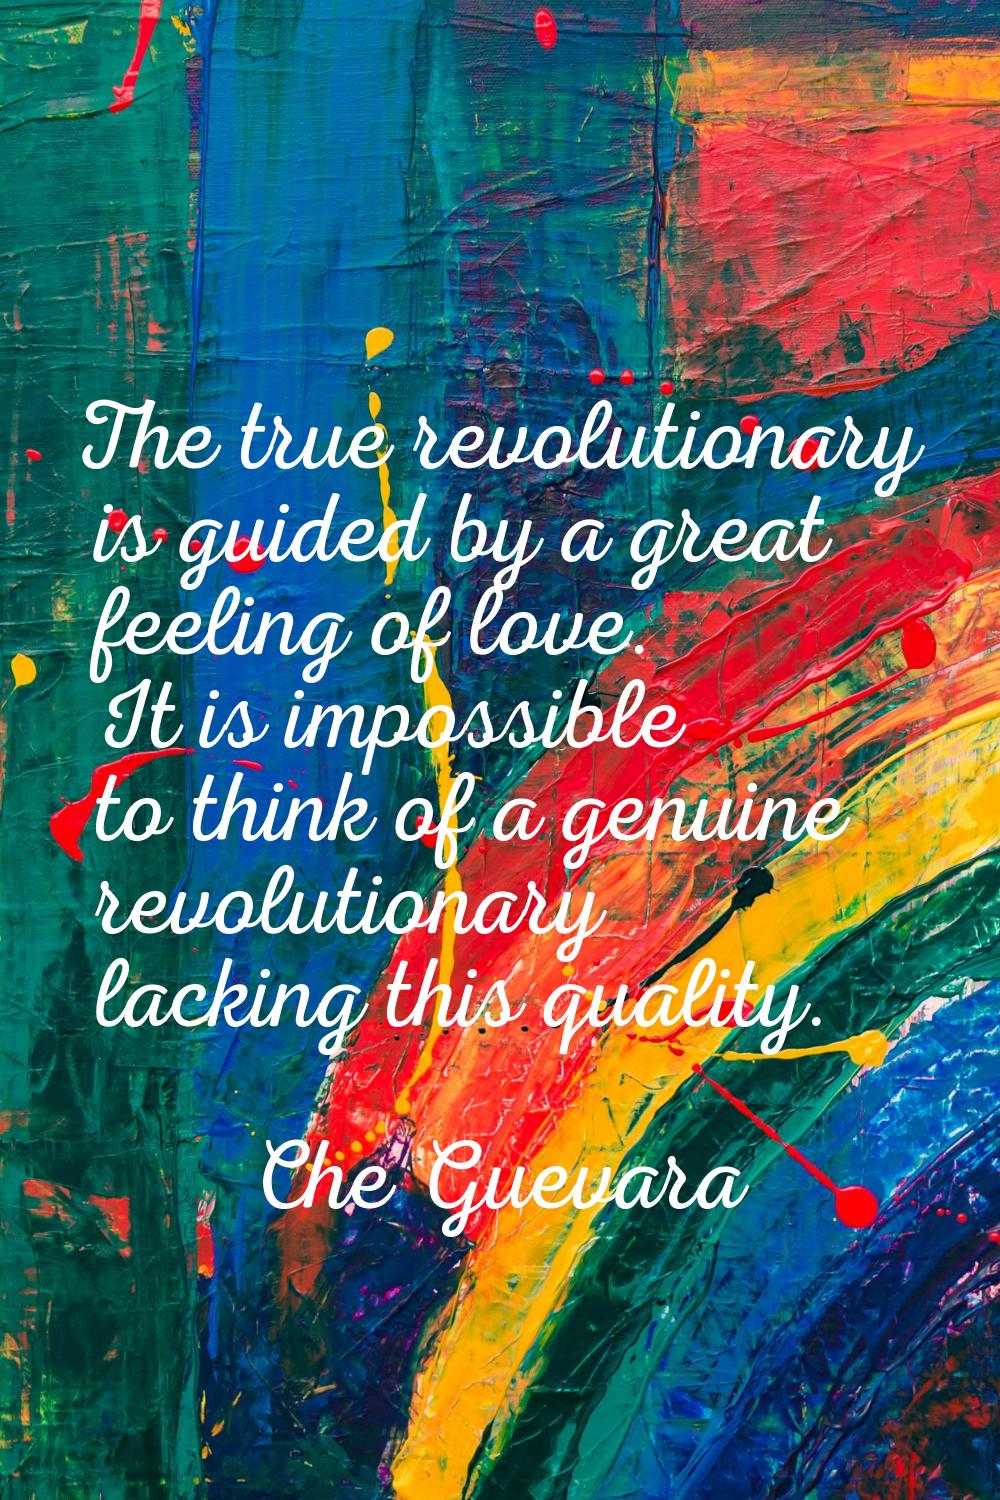 The true revolutionary is guided by a great feeling of love. It is impossible to think of a genuine